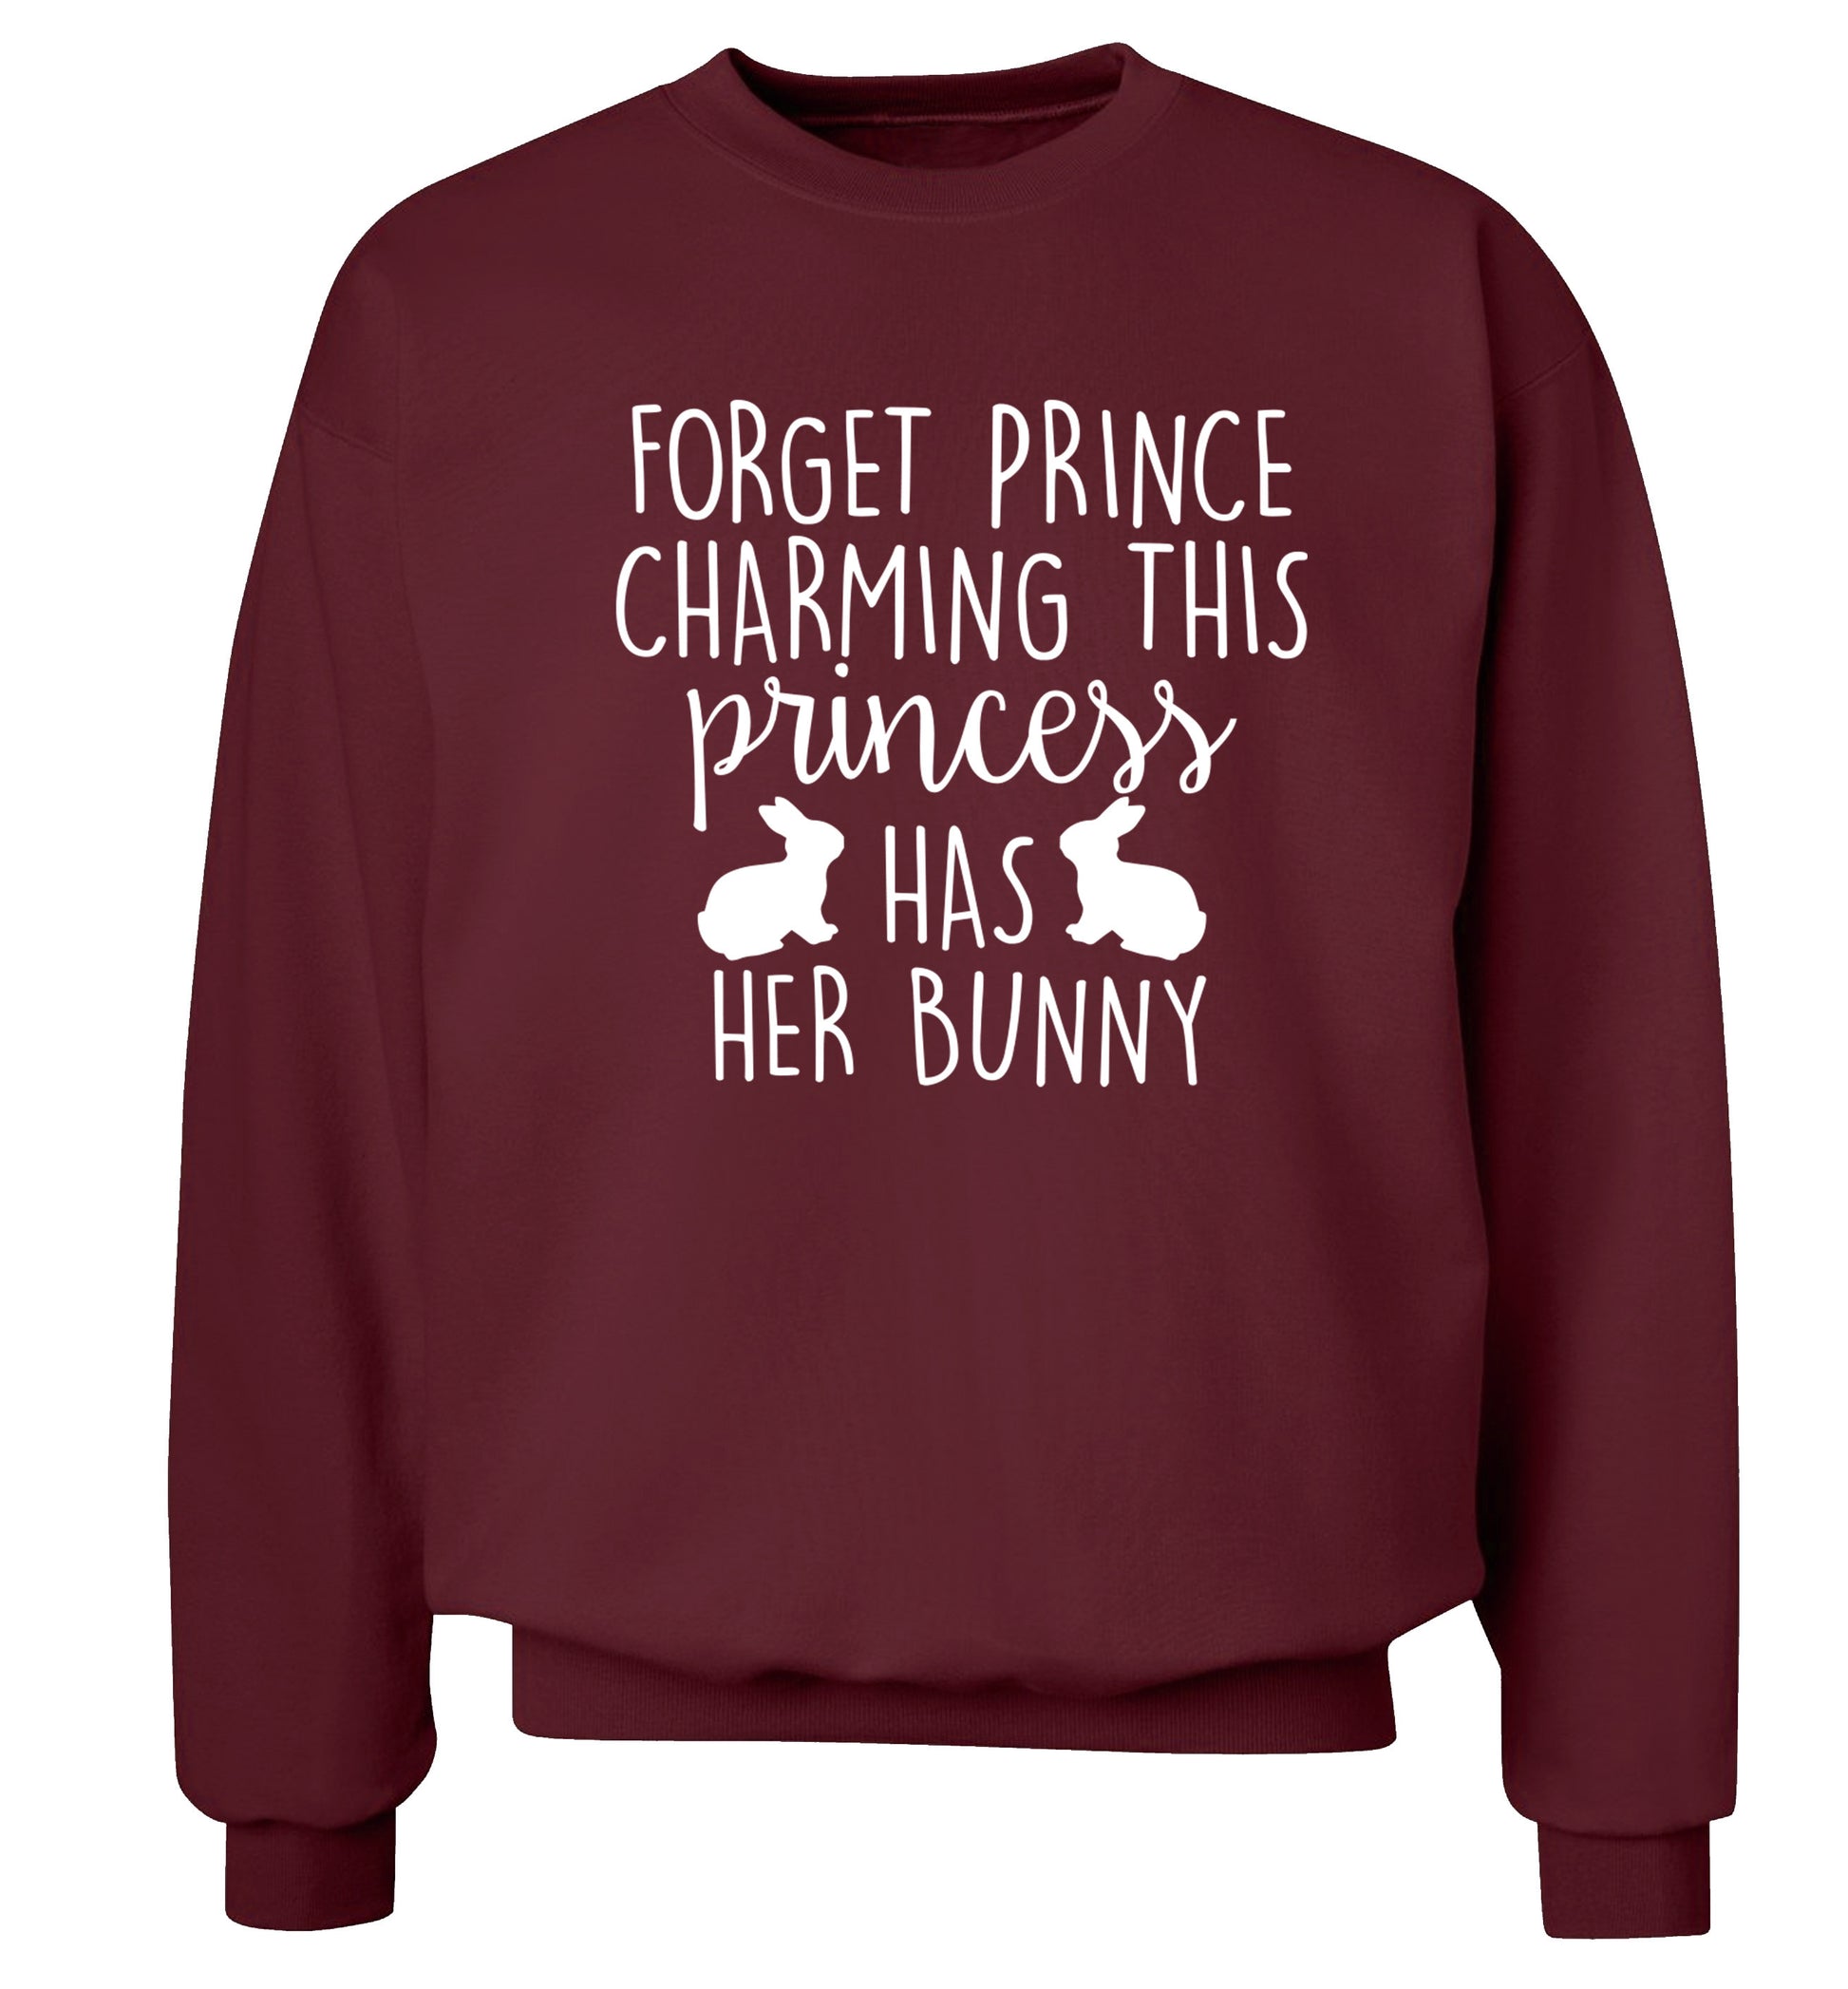 Forget prince charming this princess has her bunny Adult's unisex maroon  sweater 2XL